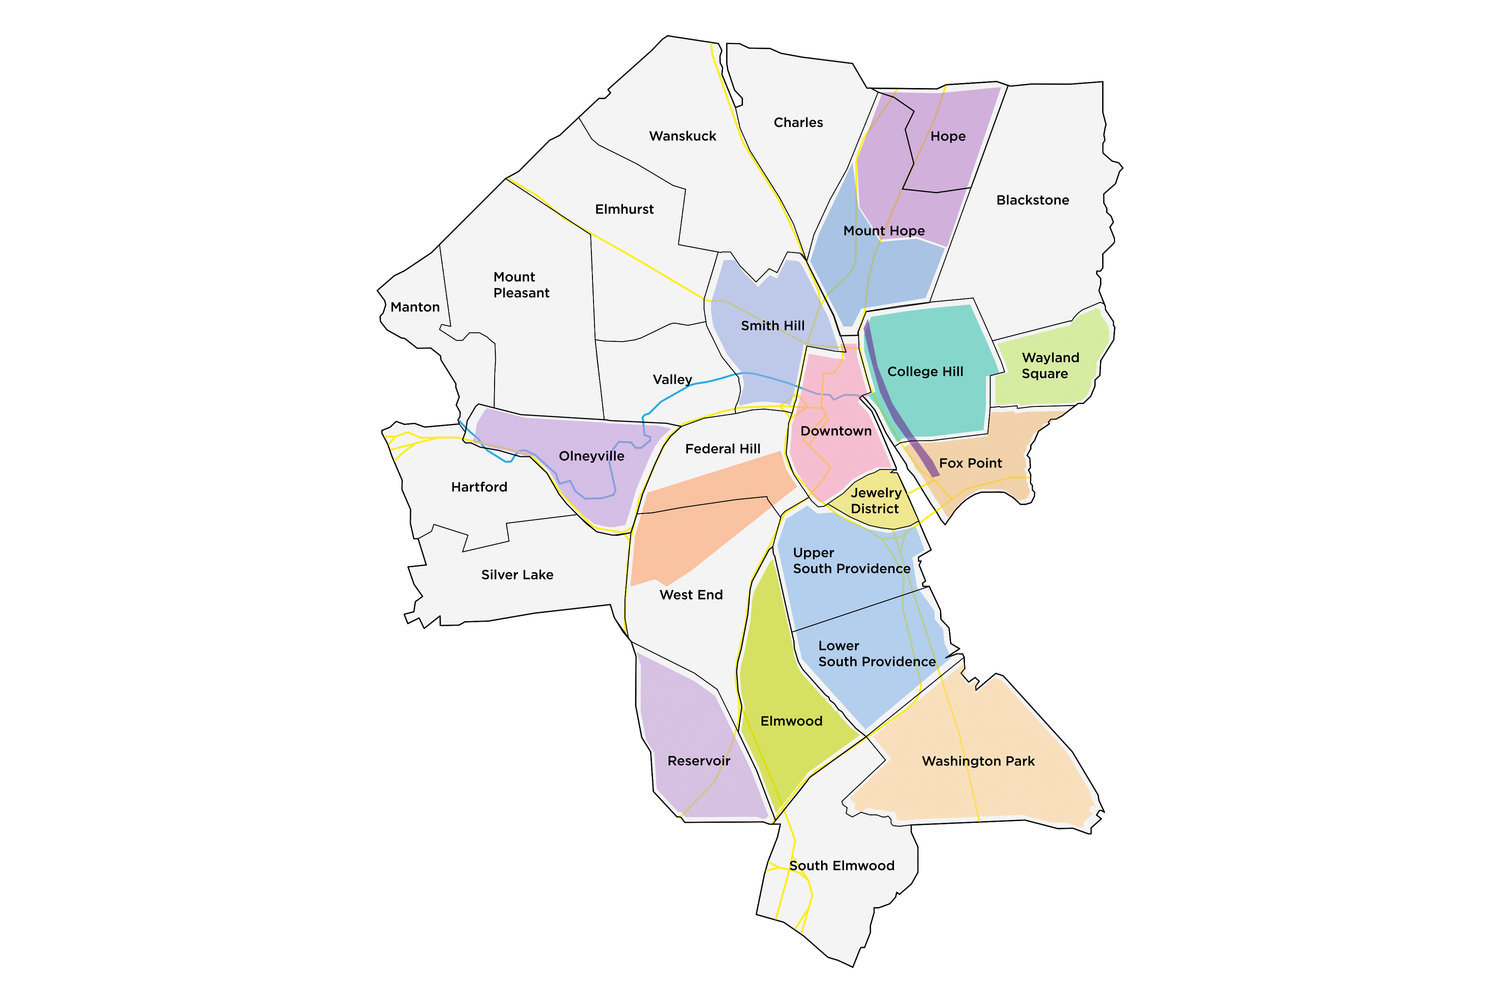 This map shows the various neighborhood associations across the City